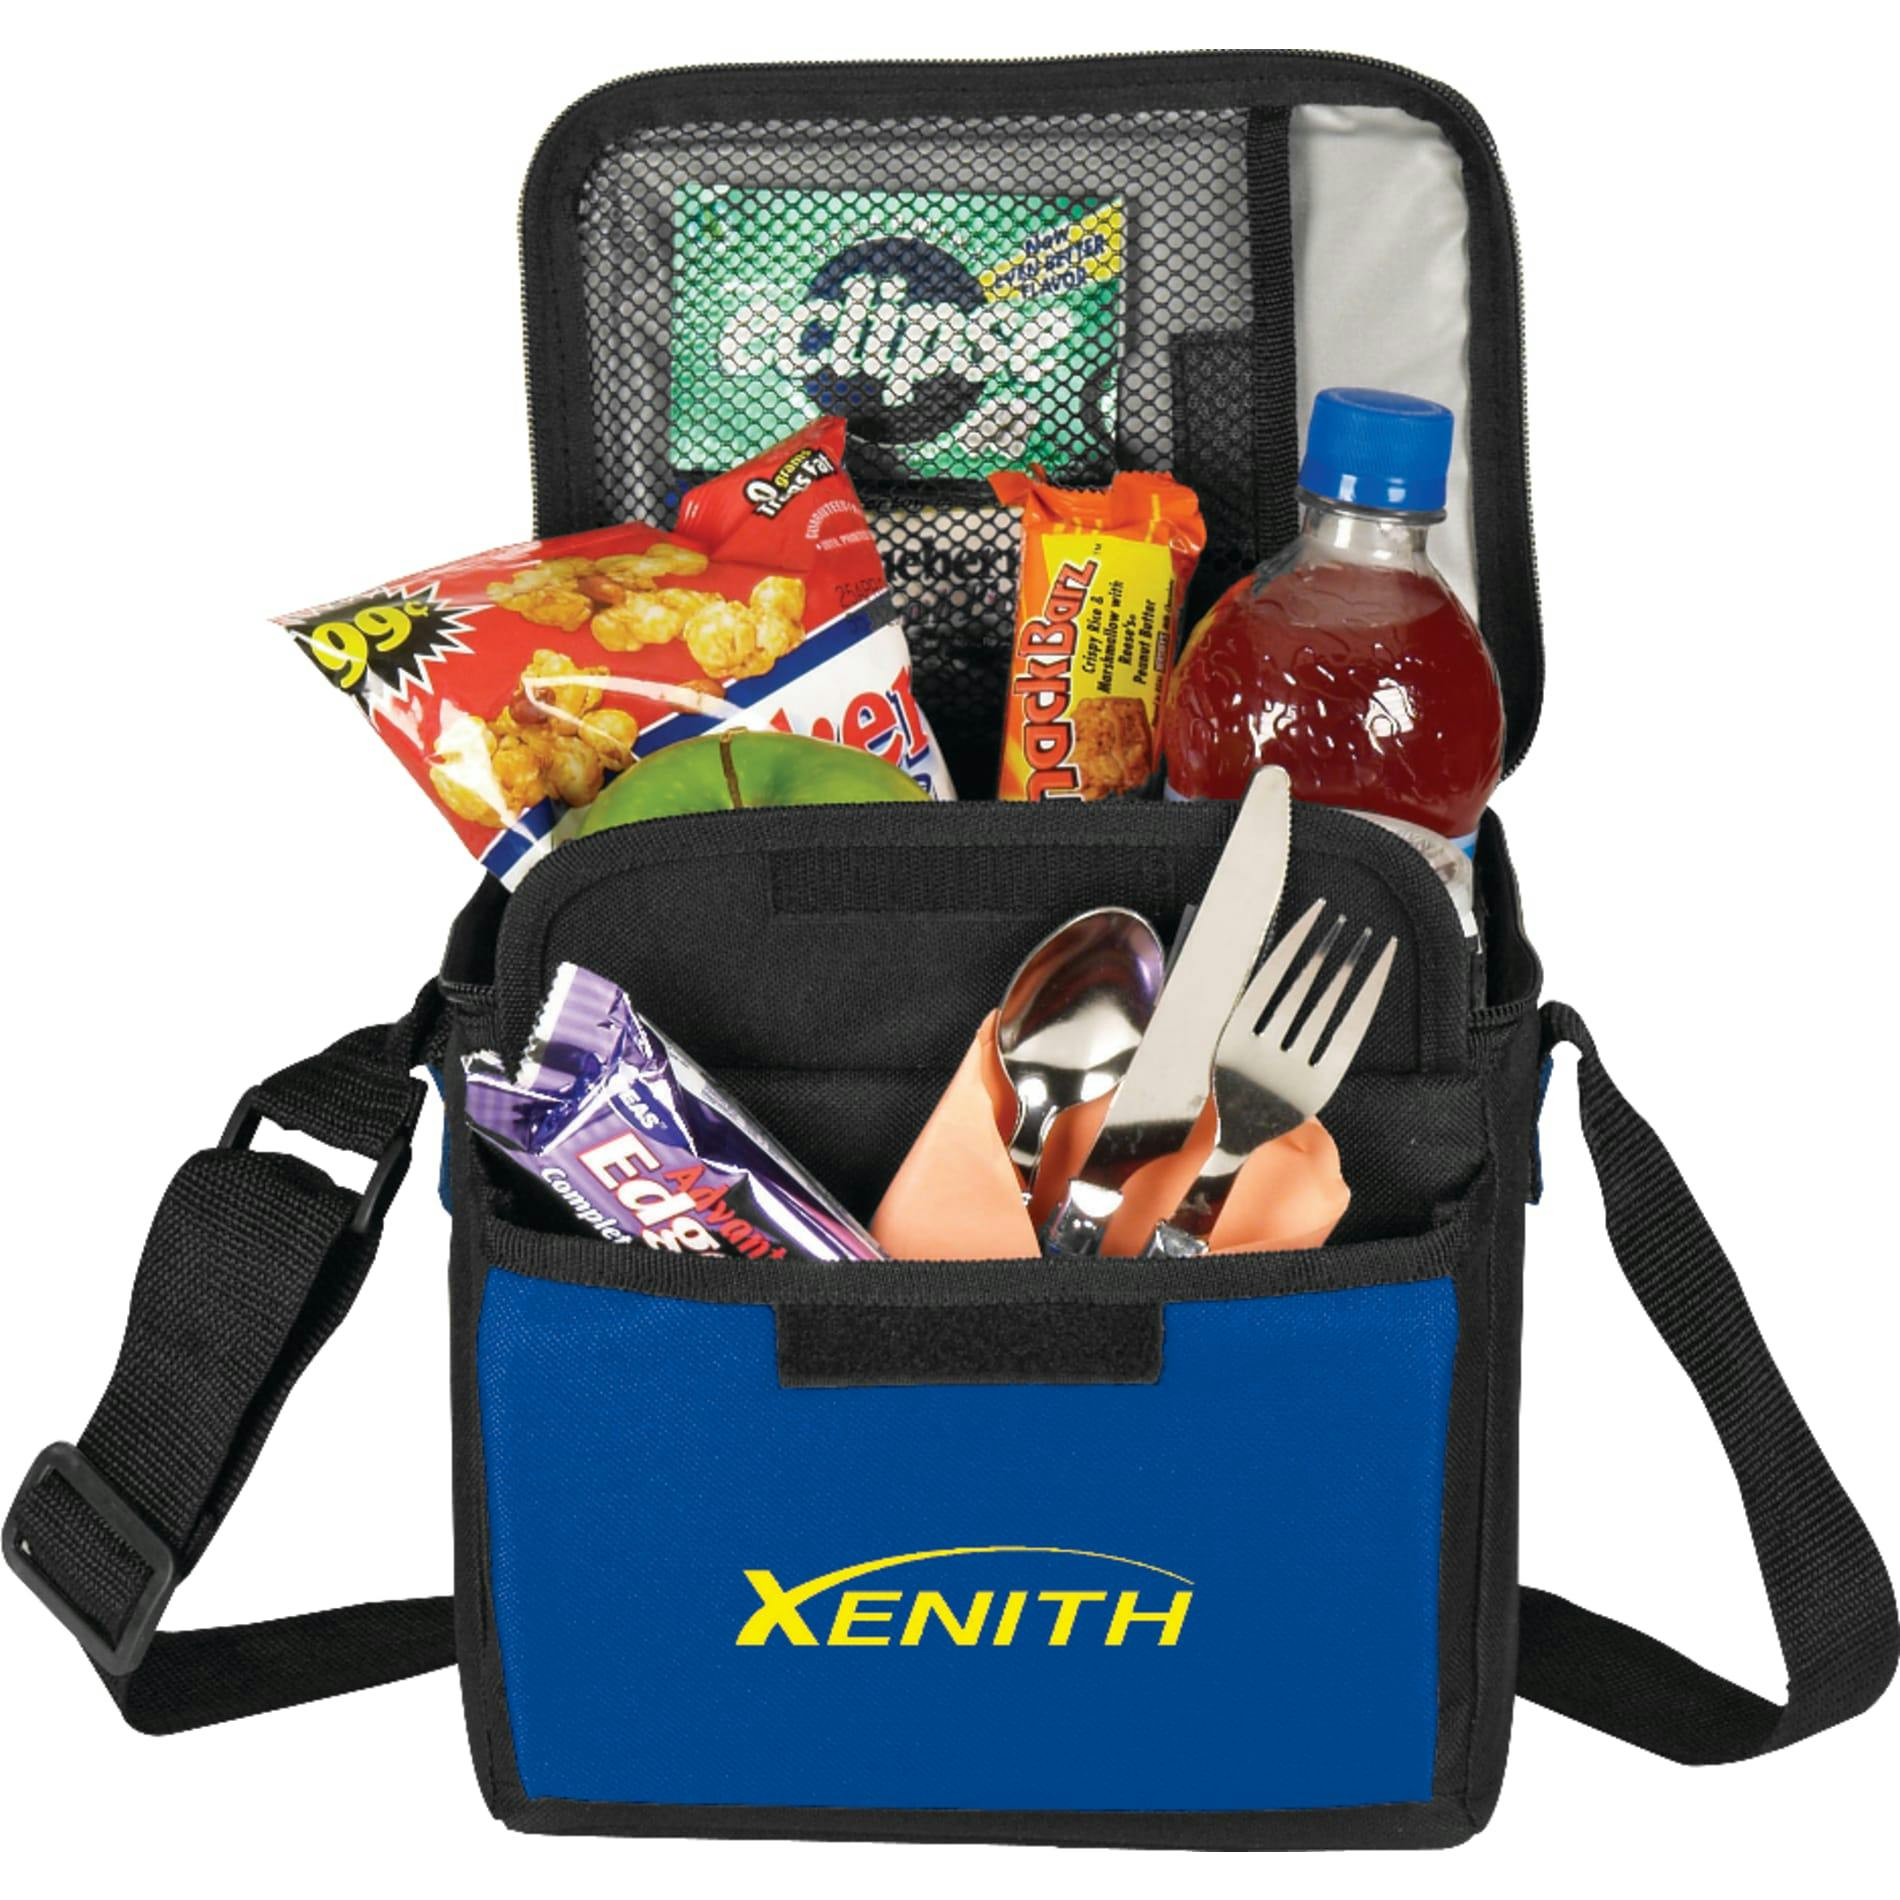 6-Can Lunch Cooler - additional Image 1